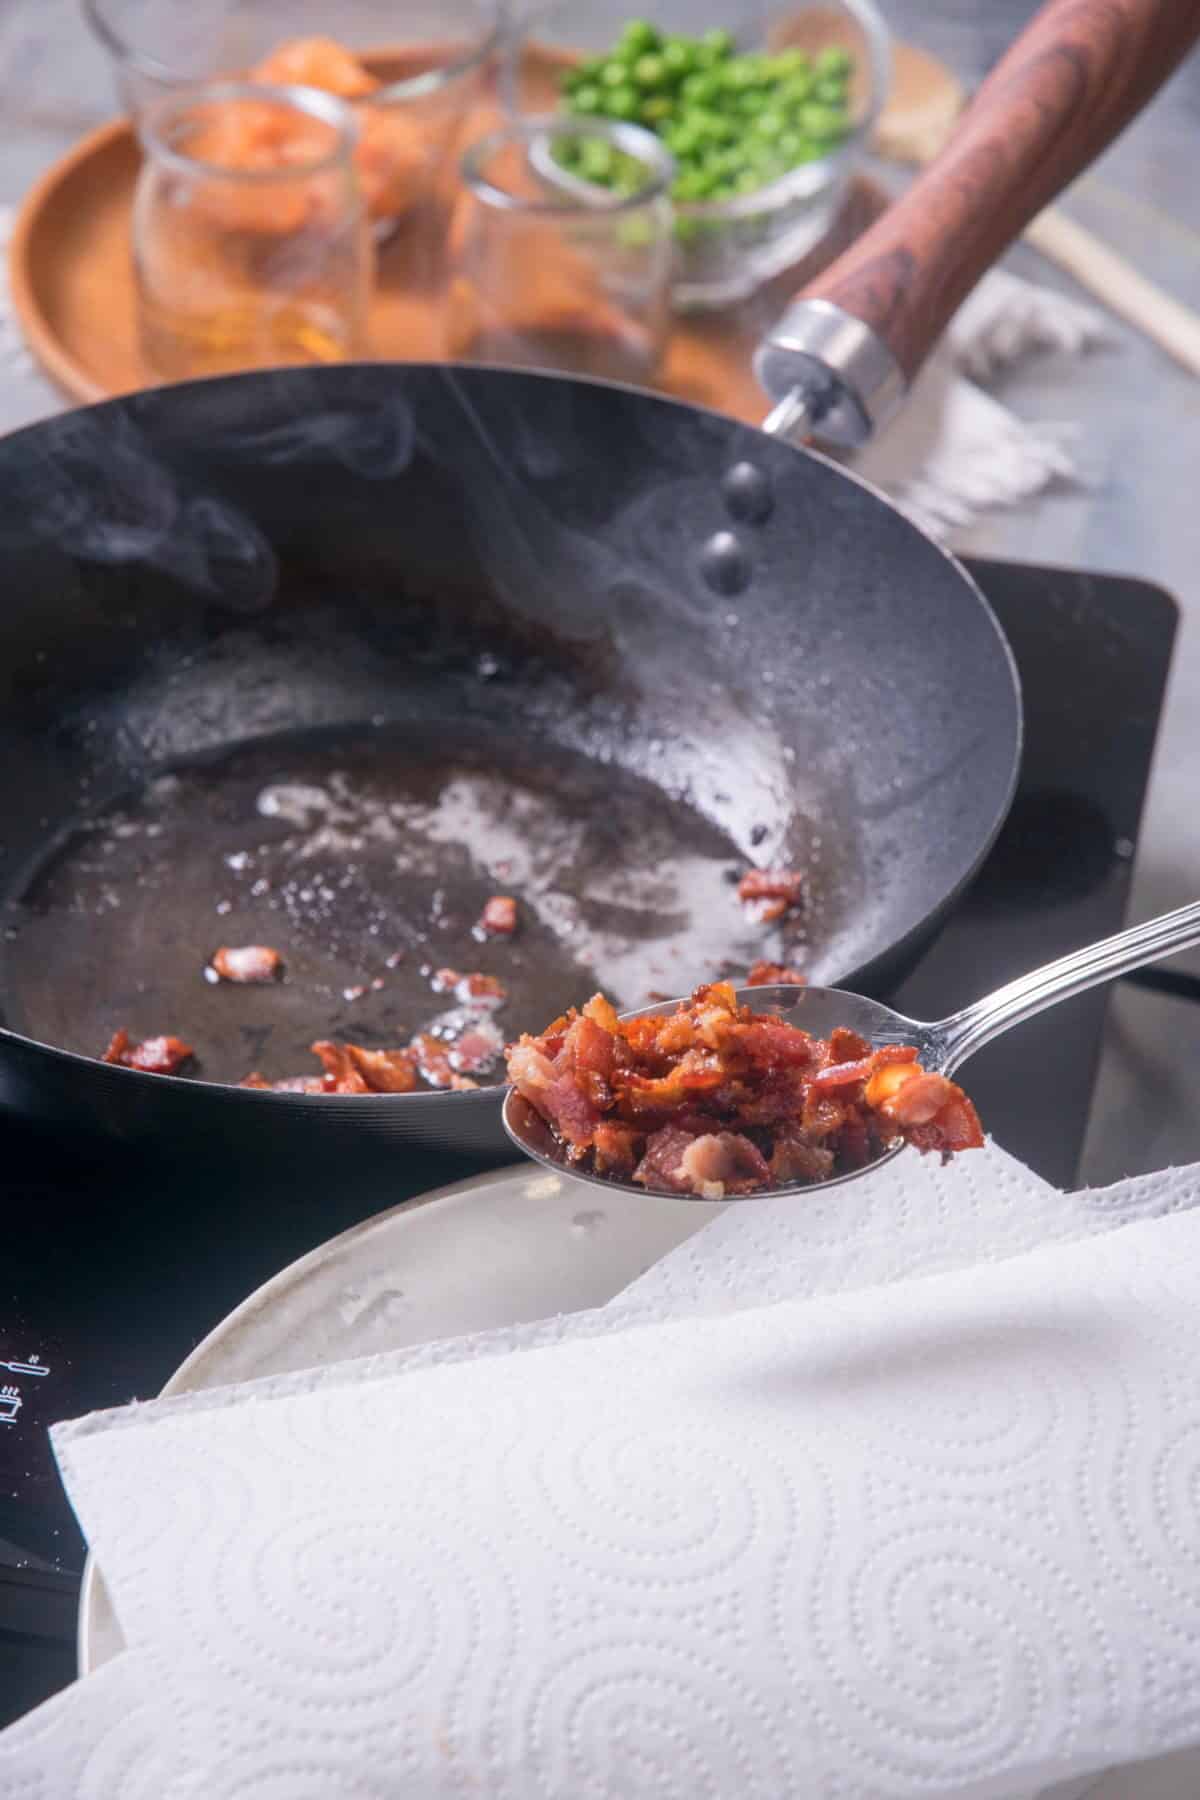 Cooked bacon bits in a spoon over paper towel, pan in the background.